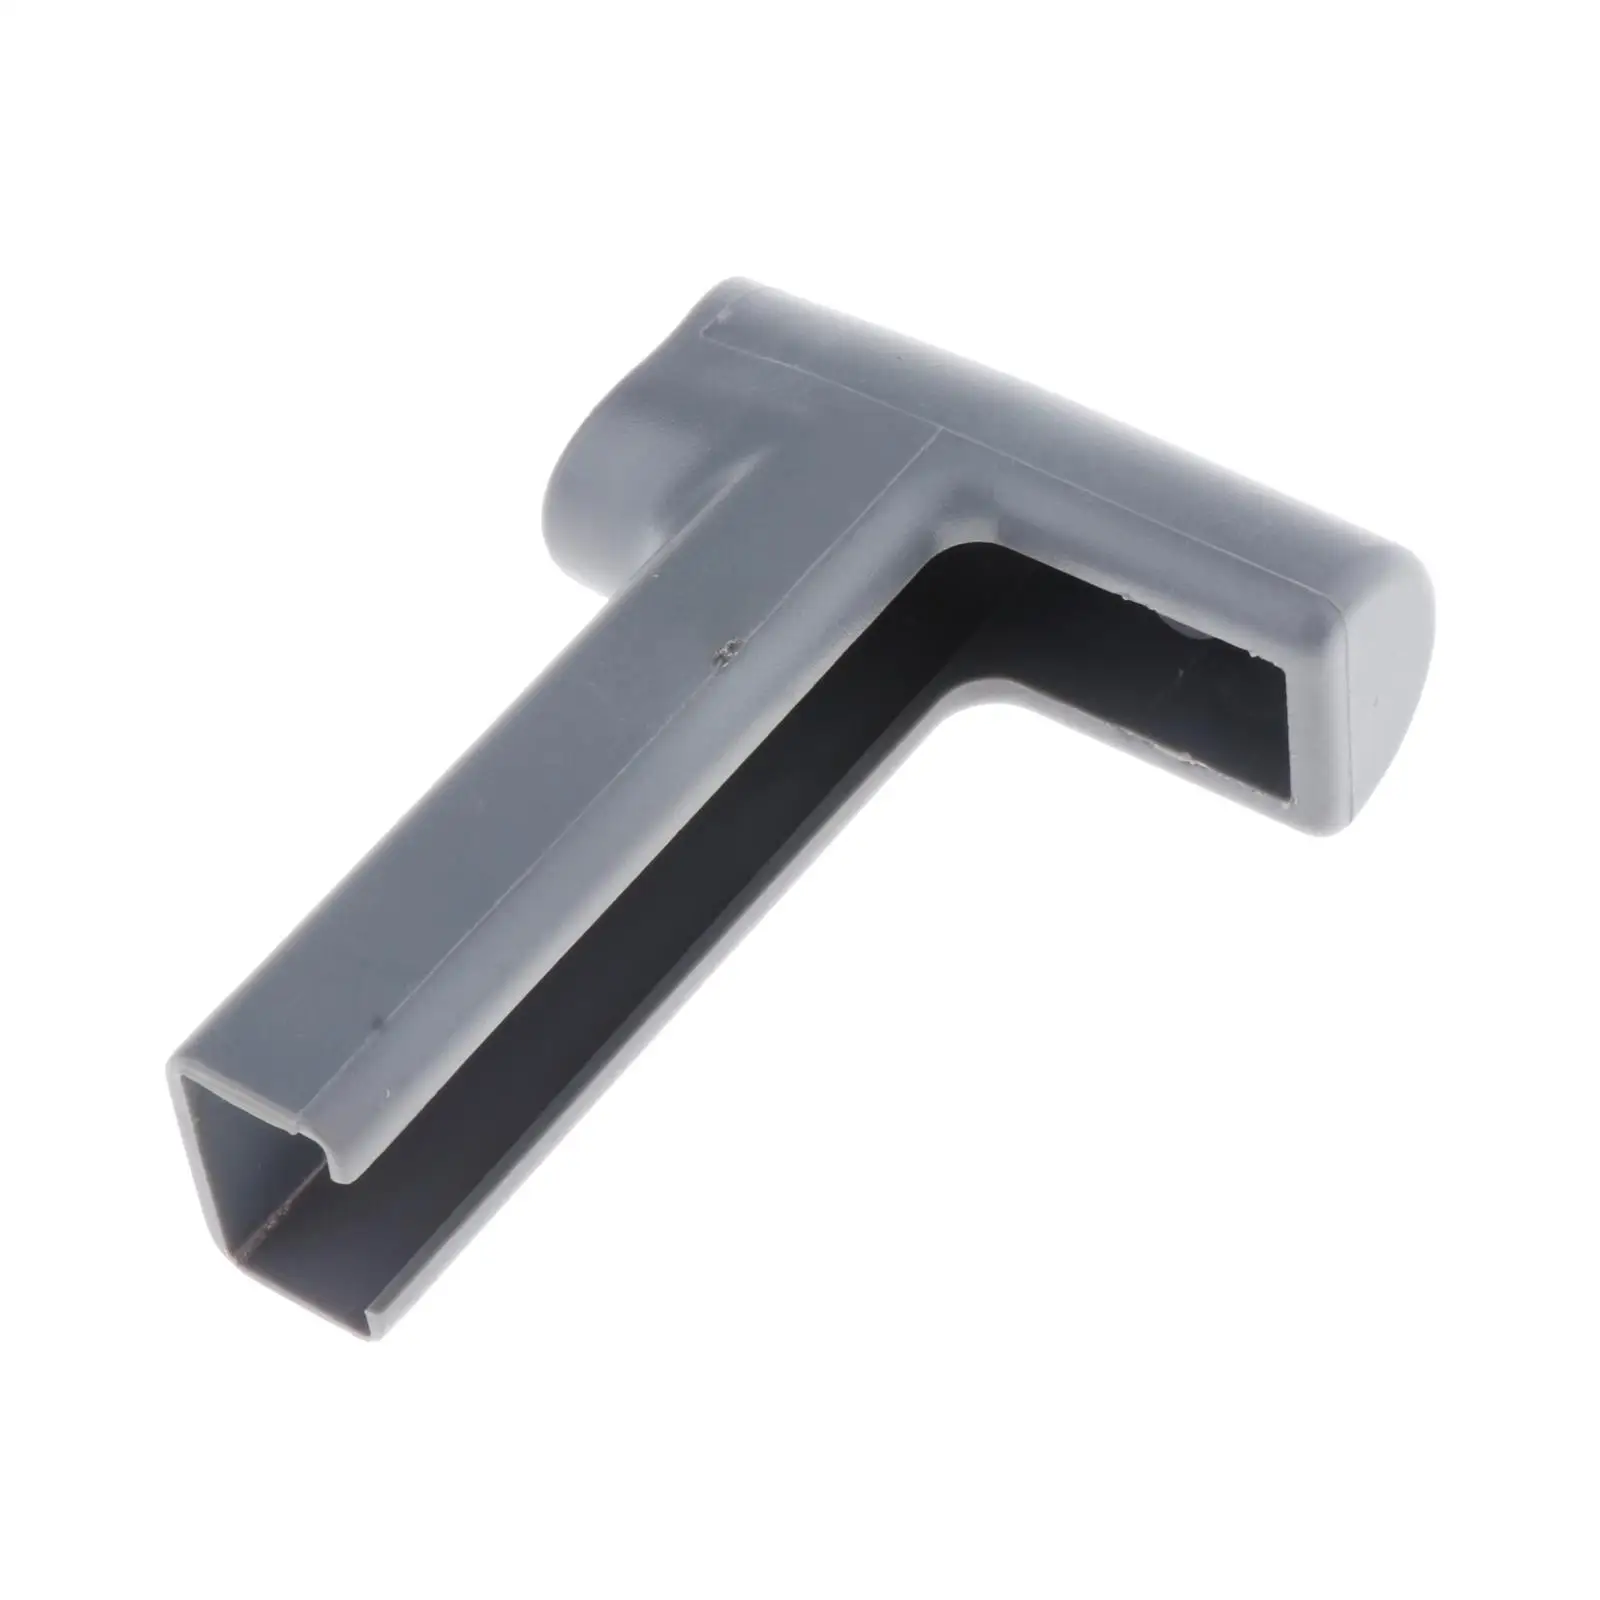 Plastic Gray Handle Housing Fit for Yamaha Remote Control Box 703-48222-00 for Parsun F15-13010002W